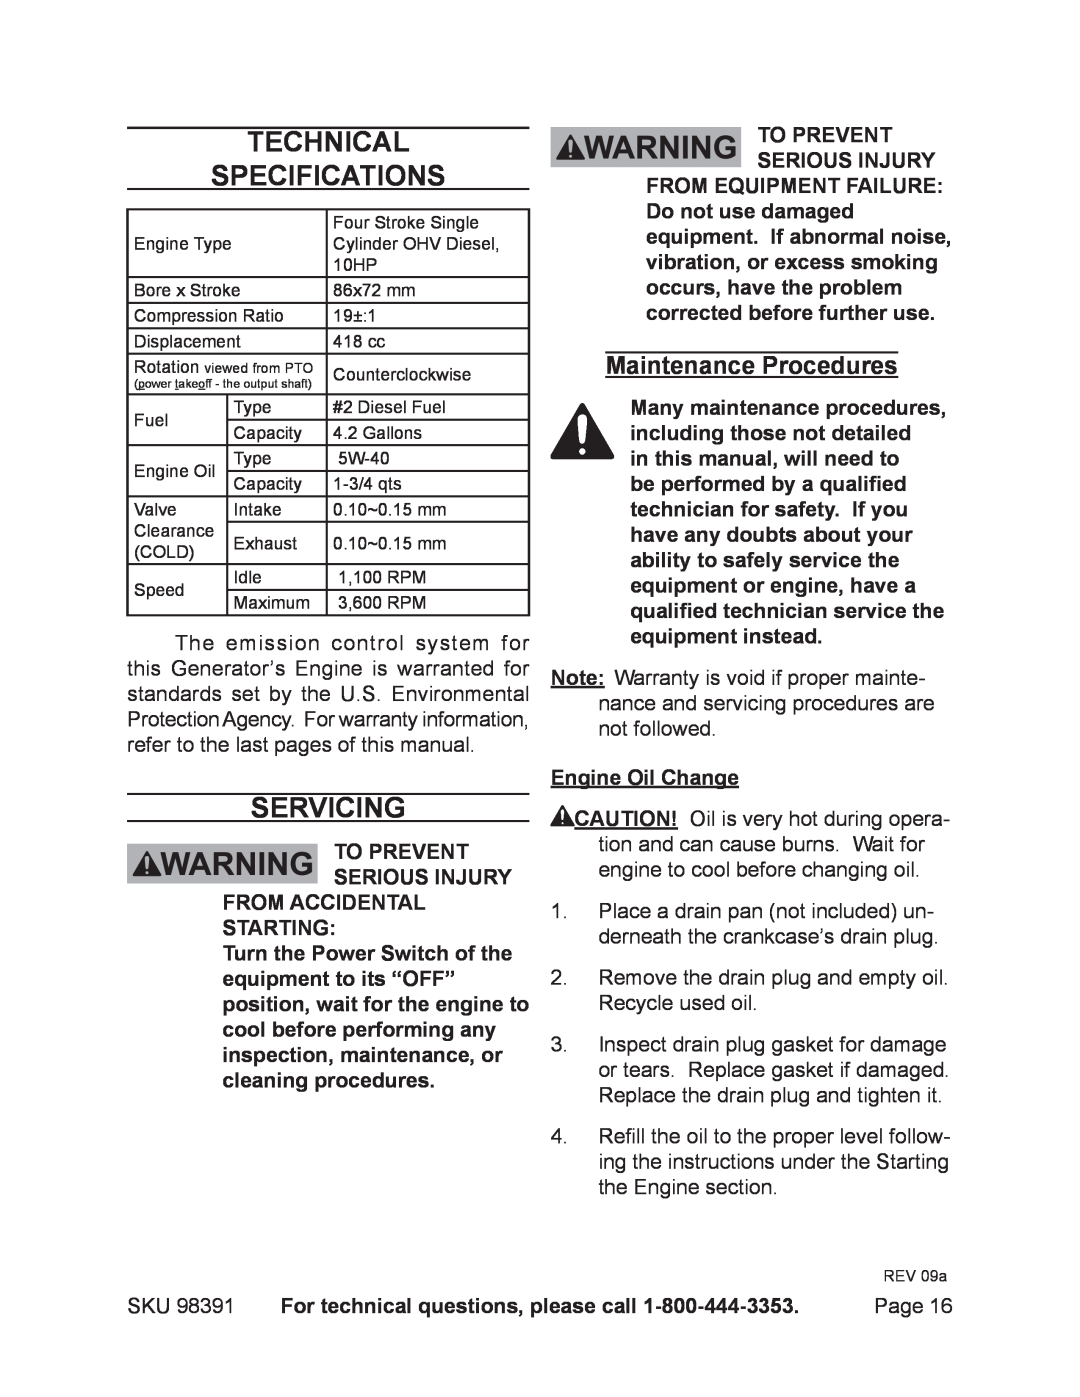 Chicago Electric 98391 manual Technical Specifications, Servicing, To prevent serious injury from accidental starting 